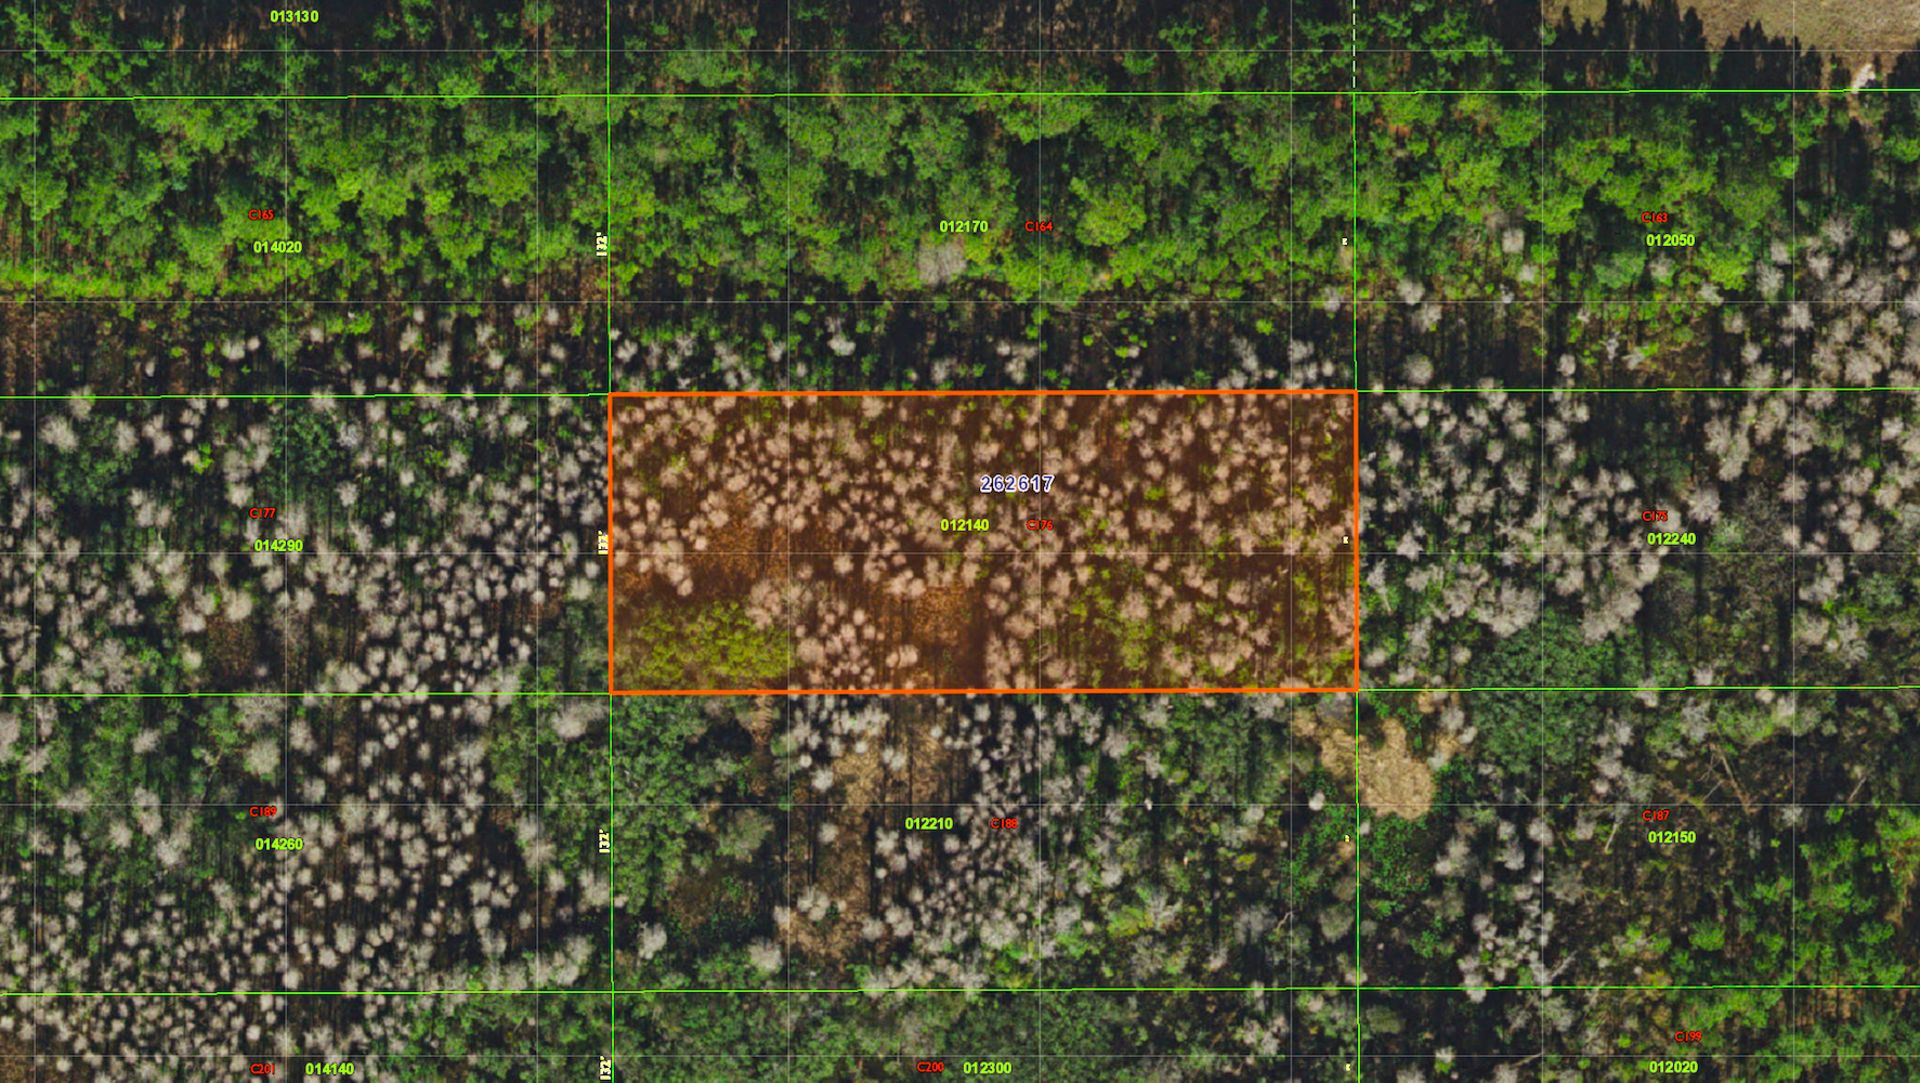 Diversify Your Real Estate Portfolio with this 1-Acre Lot in Sunny Polk County, Florida! - Image 5 of 12